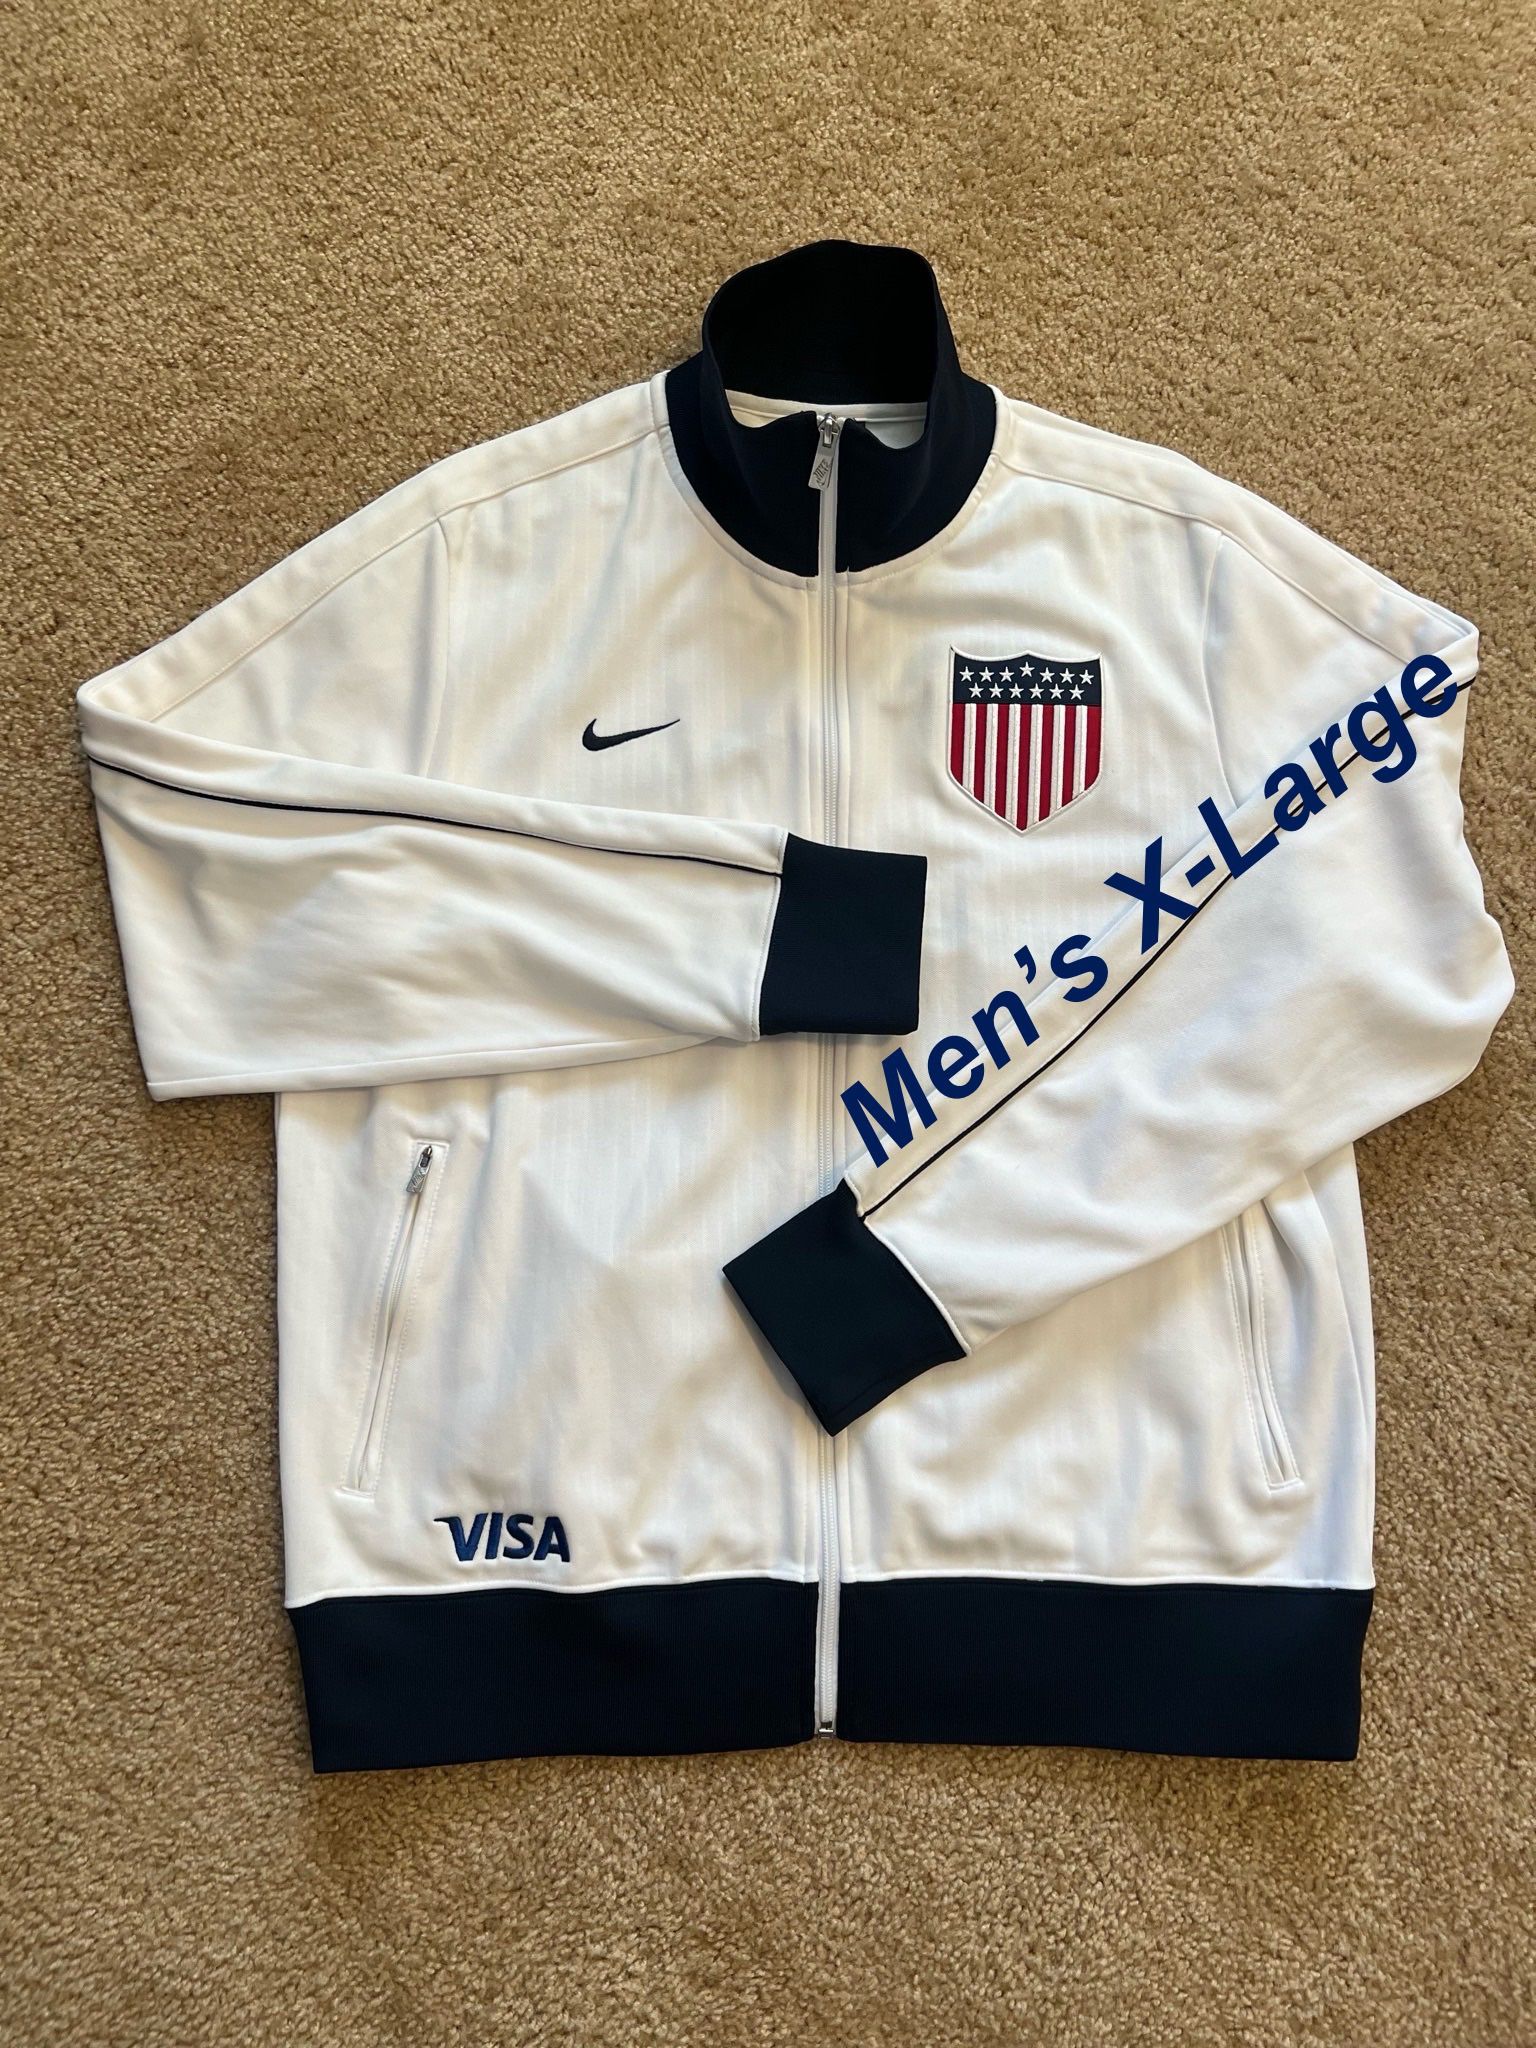 NIKE FC / AUTHENTIC 2013 USMNT Centennial Home SOCCER Full-Zip USA Track Jacket / SIZE: Men’s X-Large XL / Like New w/o Tags!! / White